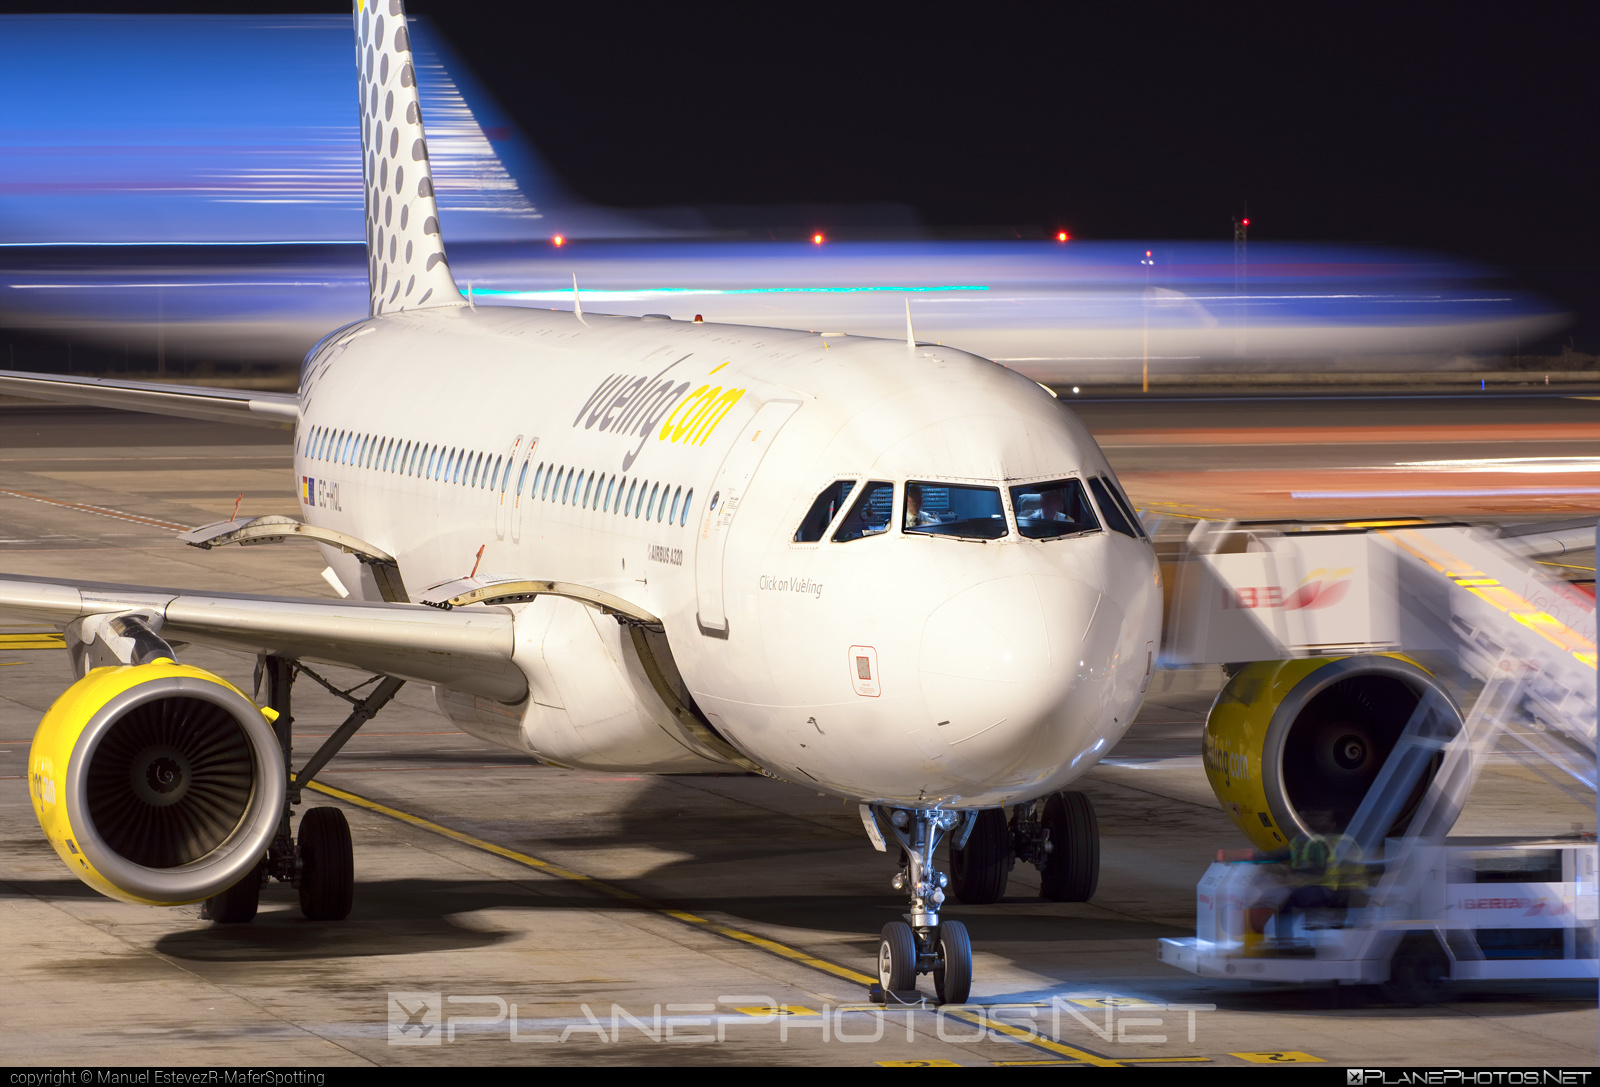 Ec Hql Airbus A320 214 Operated By Vueling Airlines Taken By Manuel